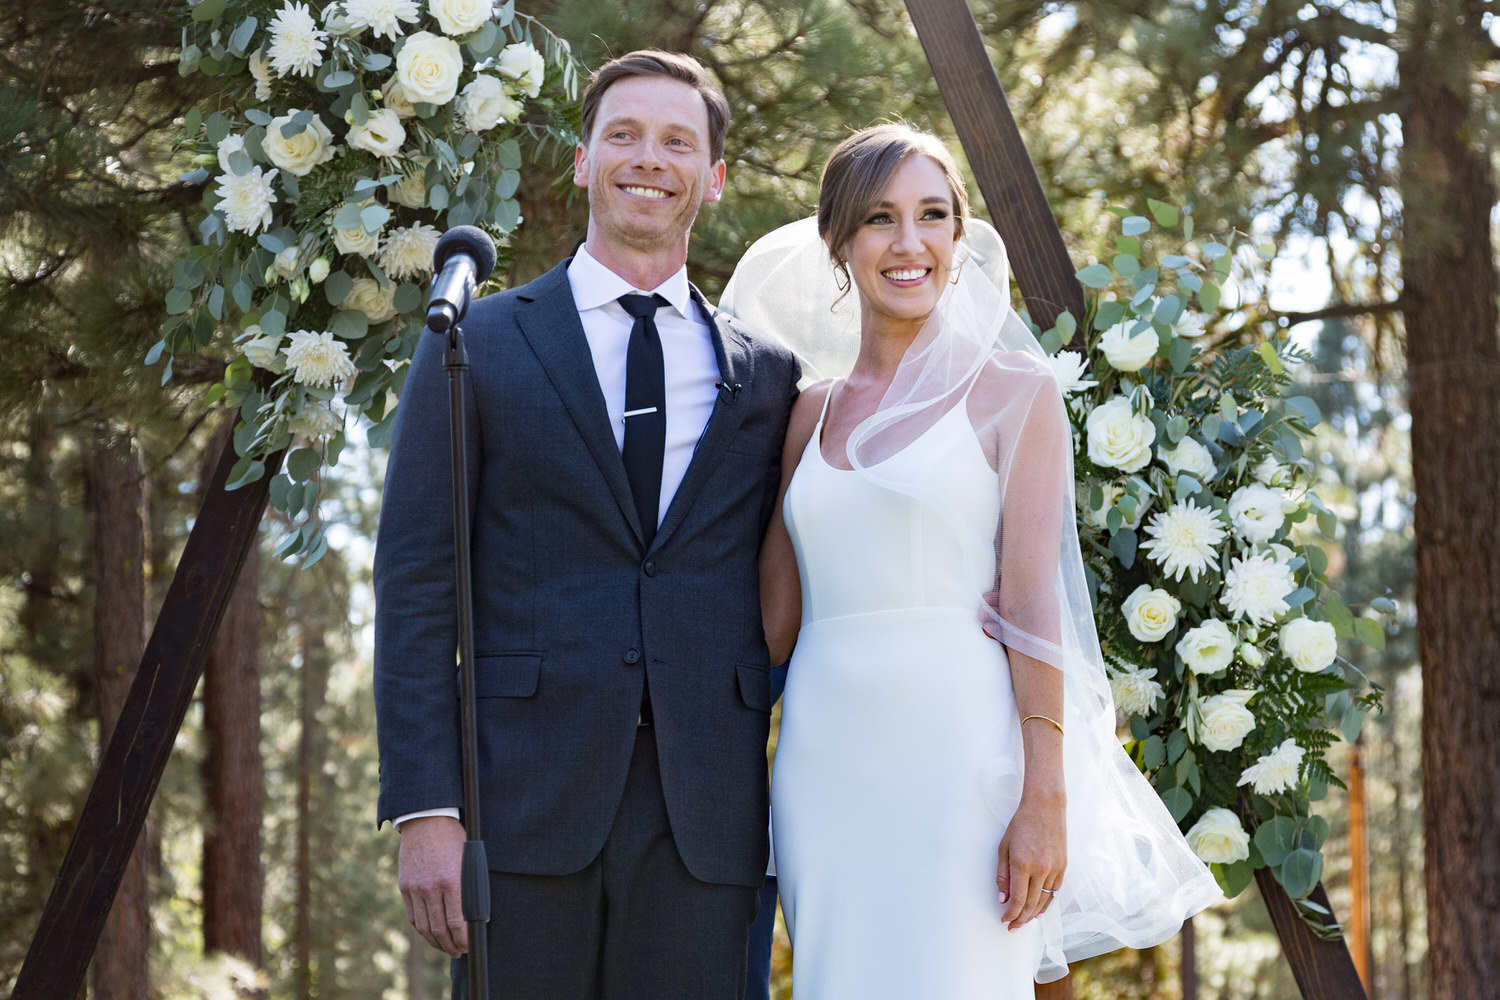 A bride and groom stand in front of a large triangular wedding arch with white flowers.